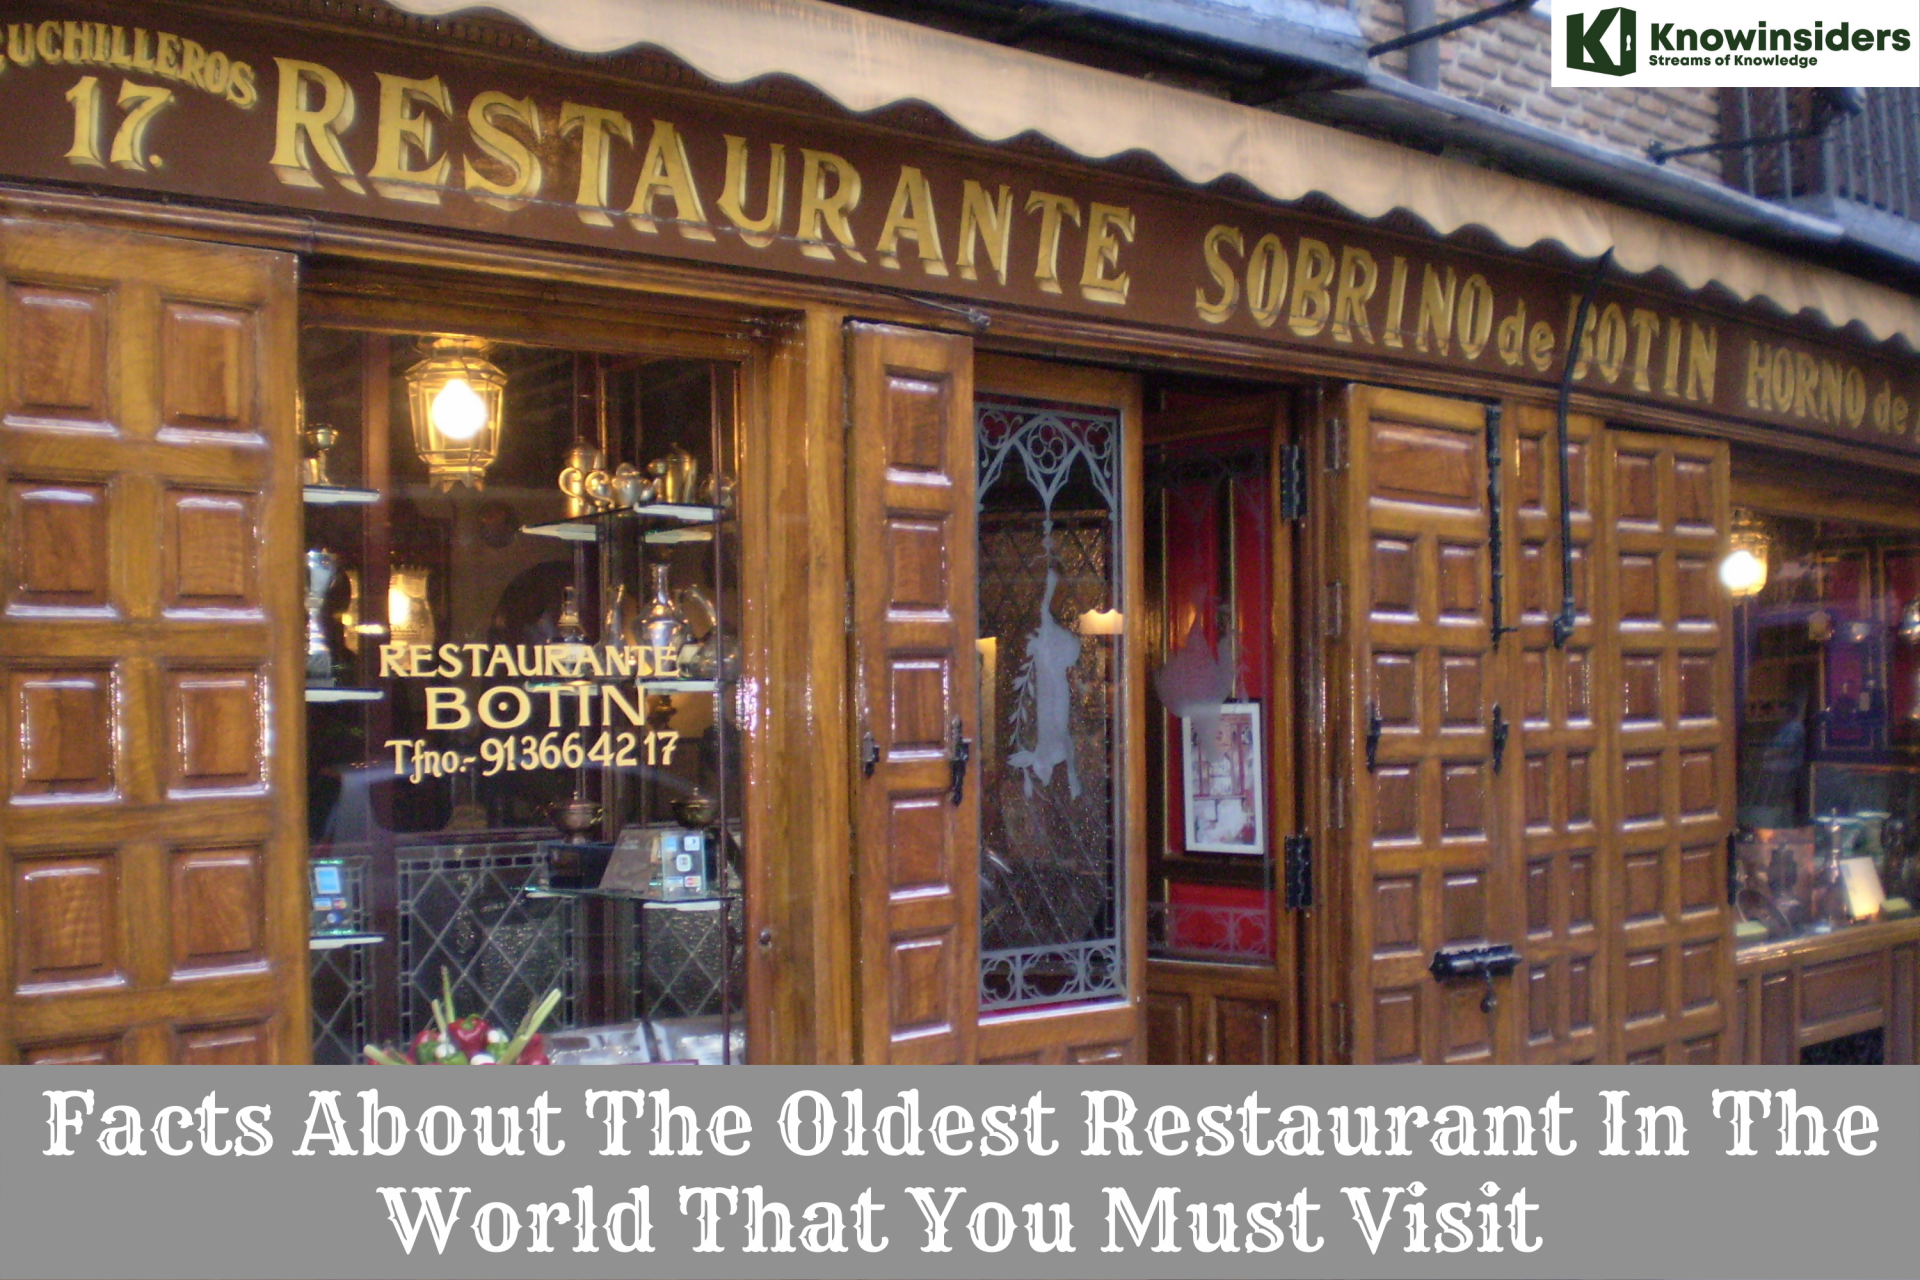 Facts About The Oldest Restaurant In The World That You Should Visit